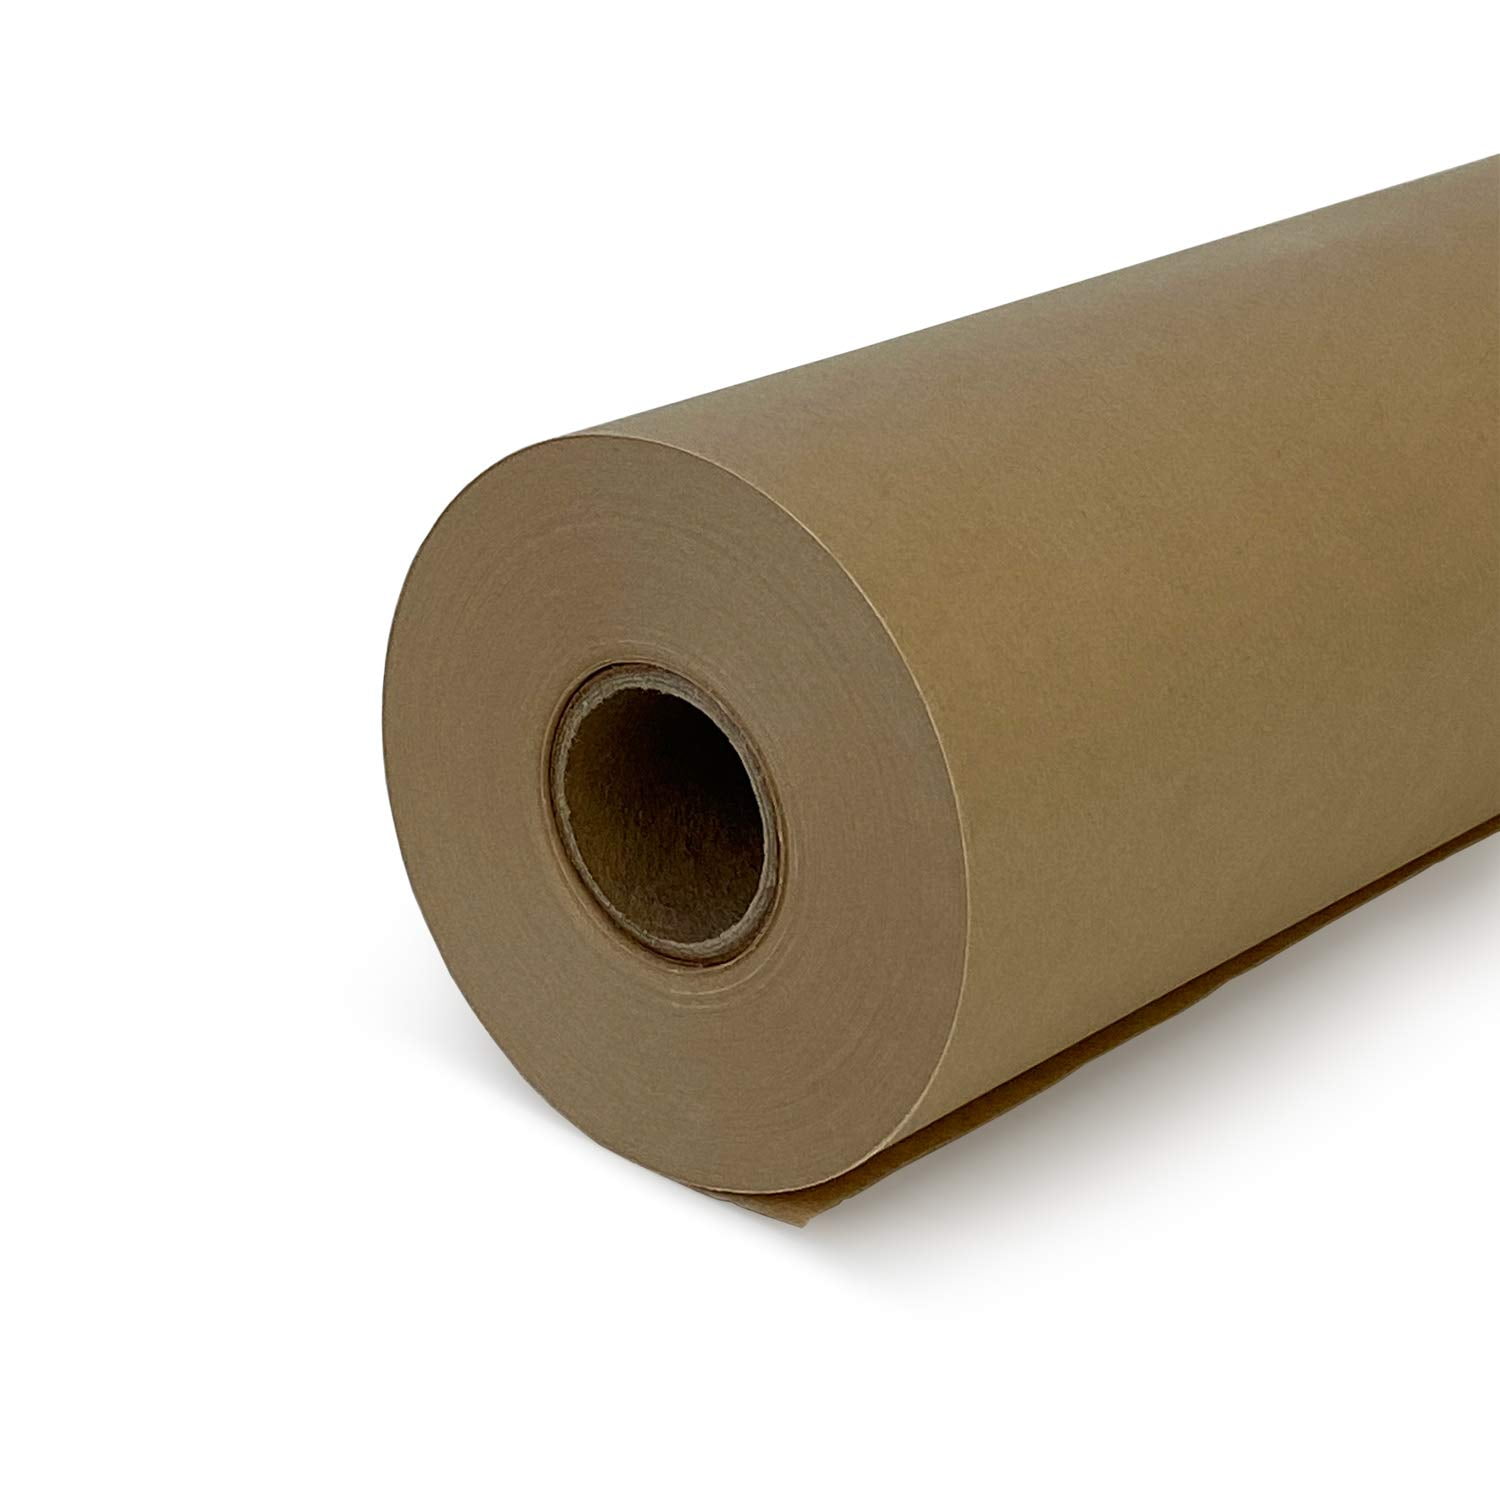 Pack of 6 Floor Masking Paper - Perfect Paper for Packing 100% Recycled Paper 2160 inches Kraft Wrapping Paper for Moving IDL Packaging Brown Kraft Paper Roll 18 x 180 feet 